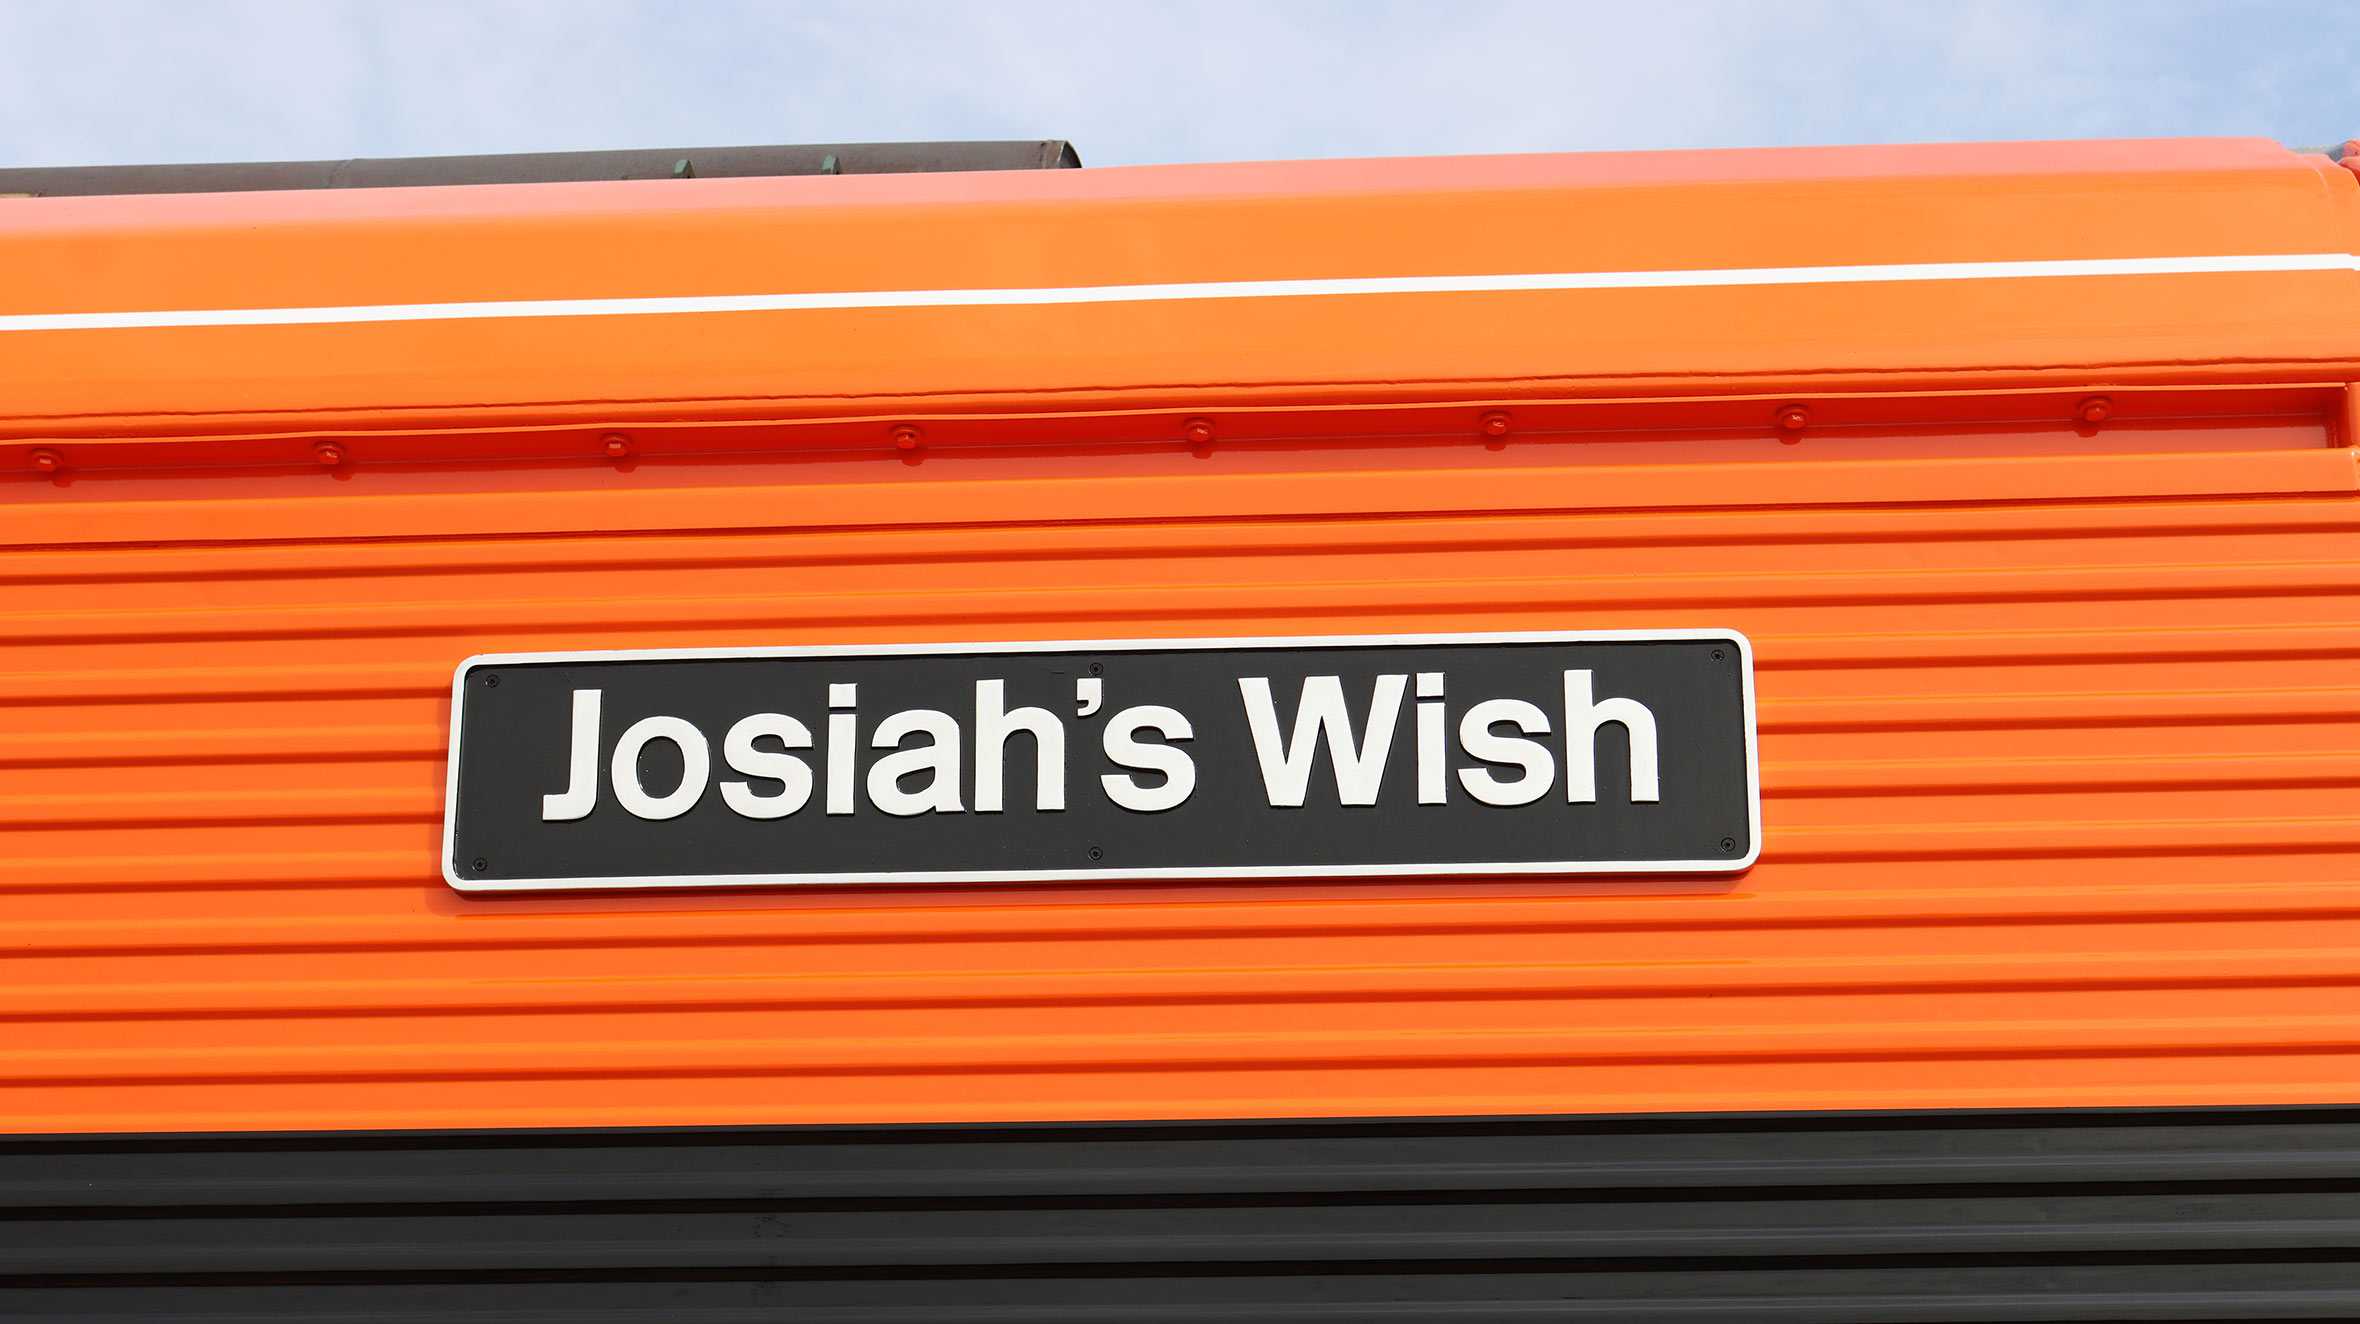 The custom name plate that was created especially for Josiah's wish.